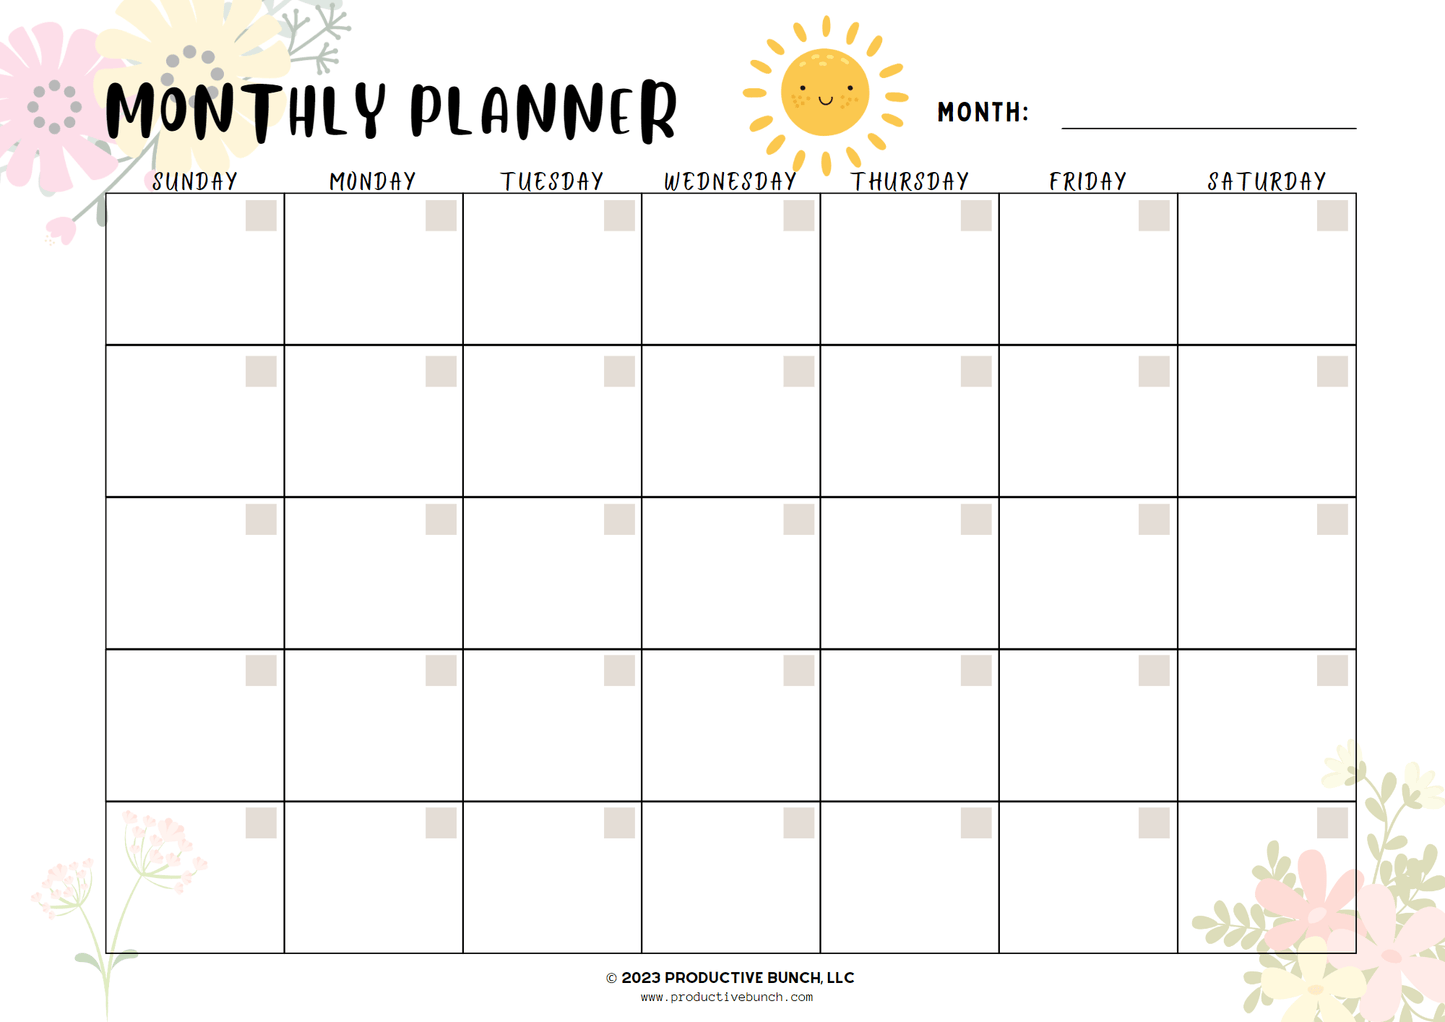 Take control of your month with the flexible Monthly Planner Pad Undated.